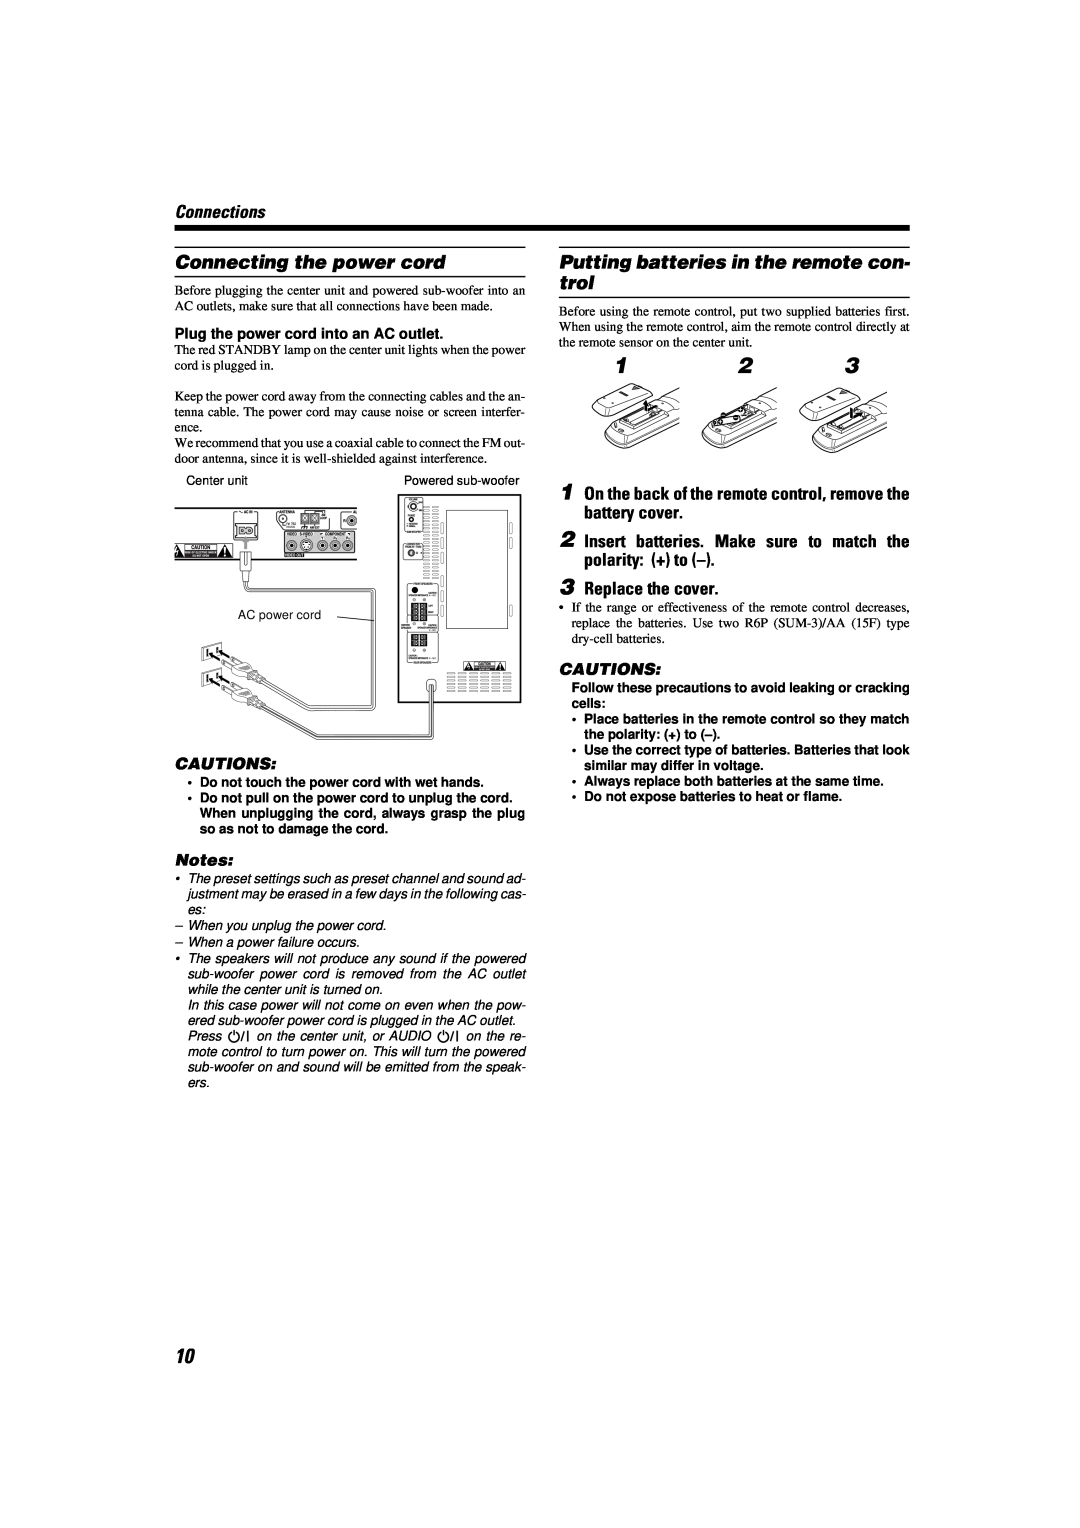 JVC TH-A9 manual Connecting the power cord, 3Replace the cover, English, Connections, Cautions 